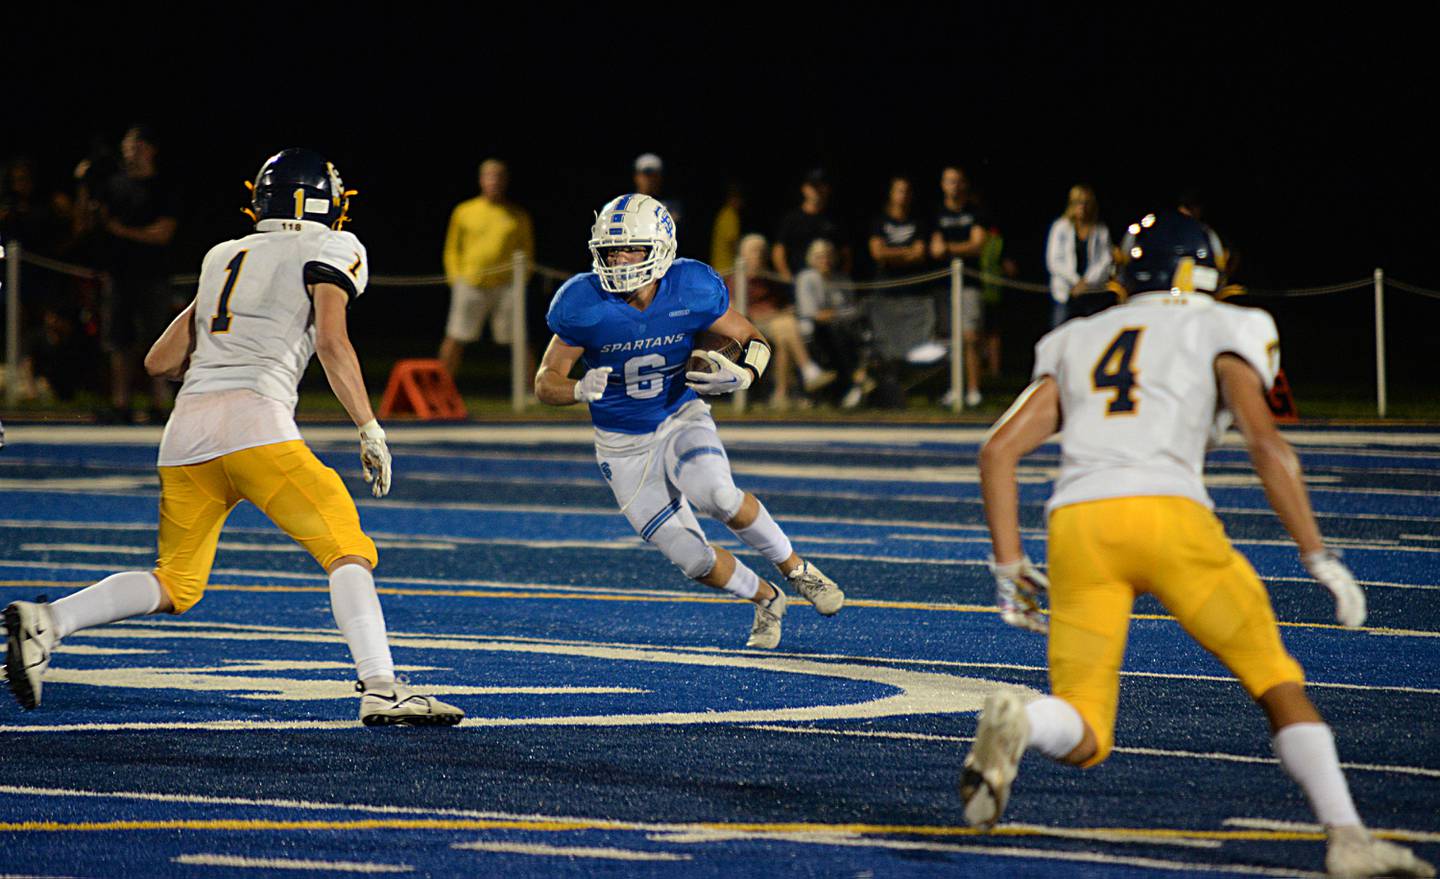 St. Francis's Brady Piper makes his way down field during their home game against Sterling Friday Sept 2, 2022.